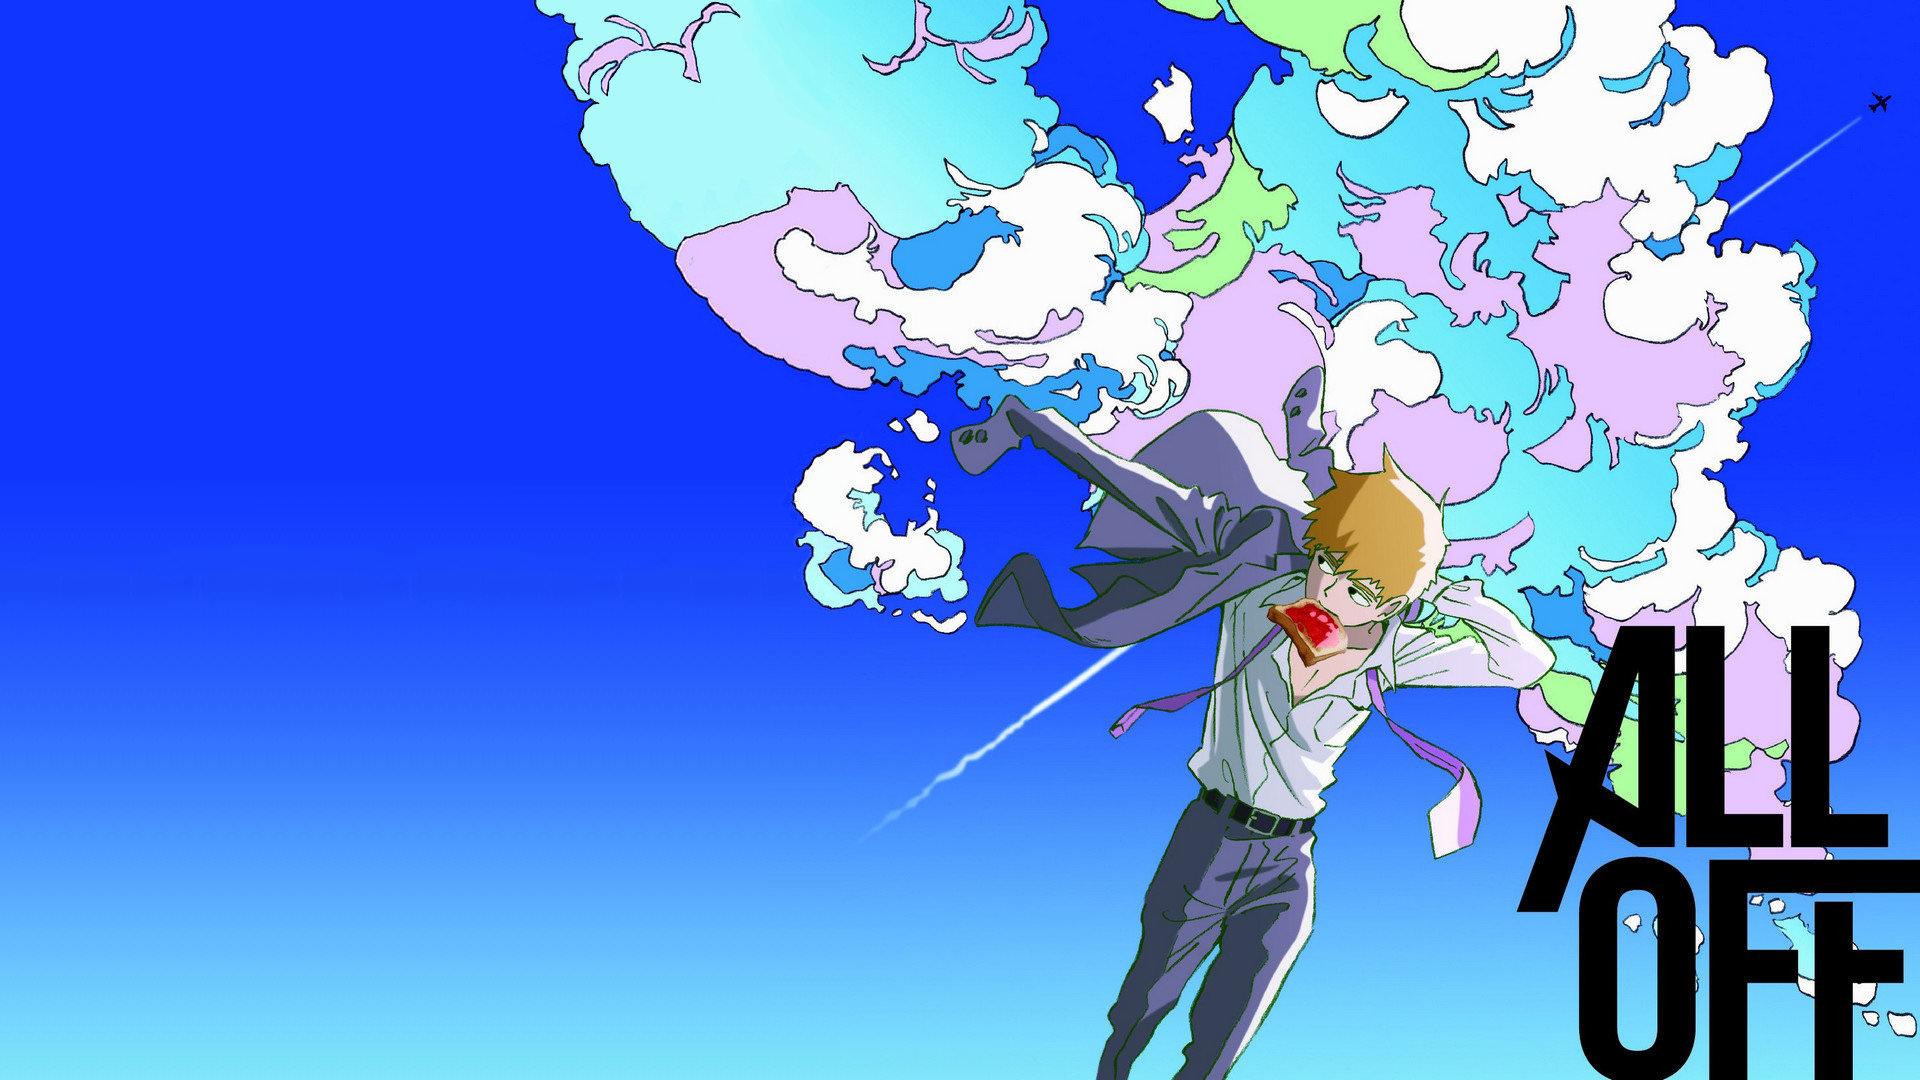 Best Mob Psycho 100 wallpaper for High Resolution HD 1080p